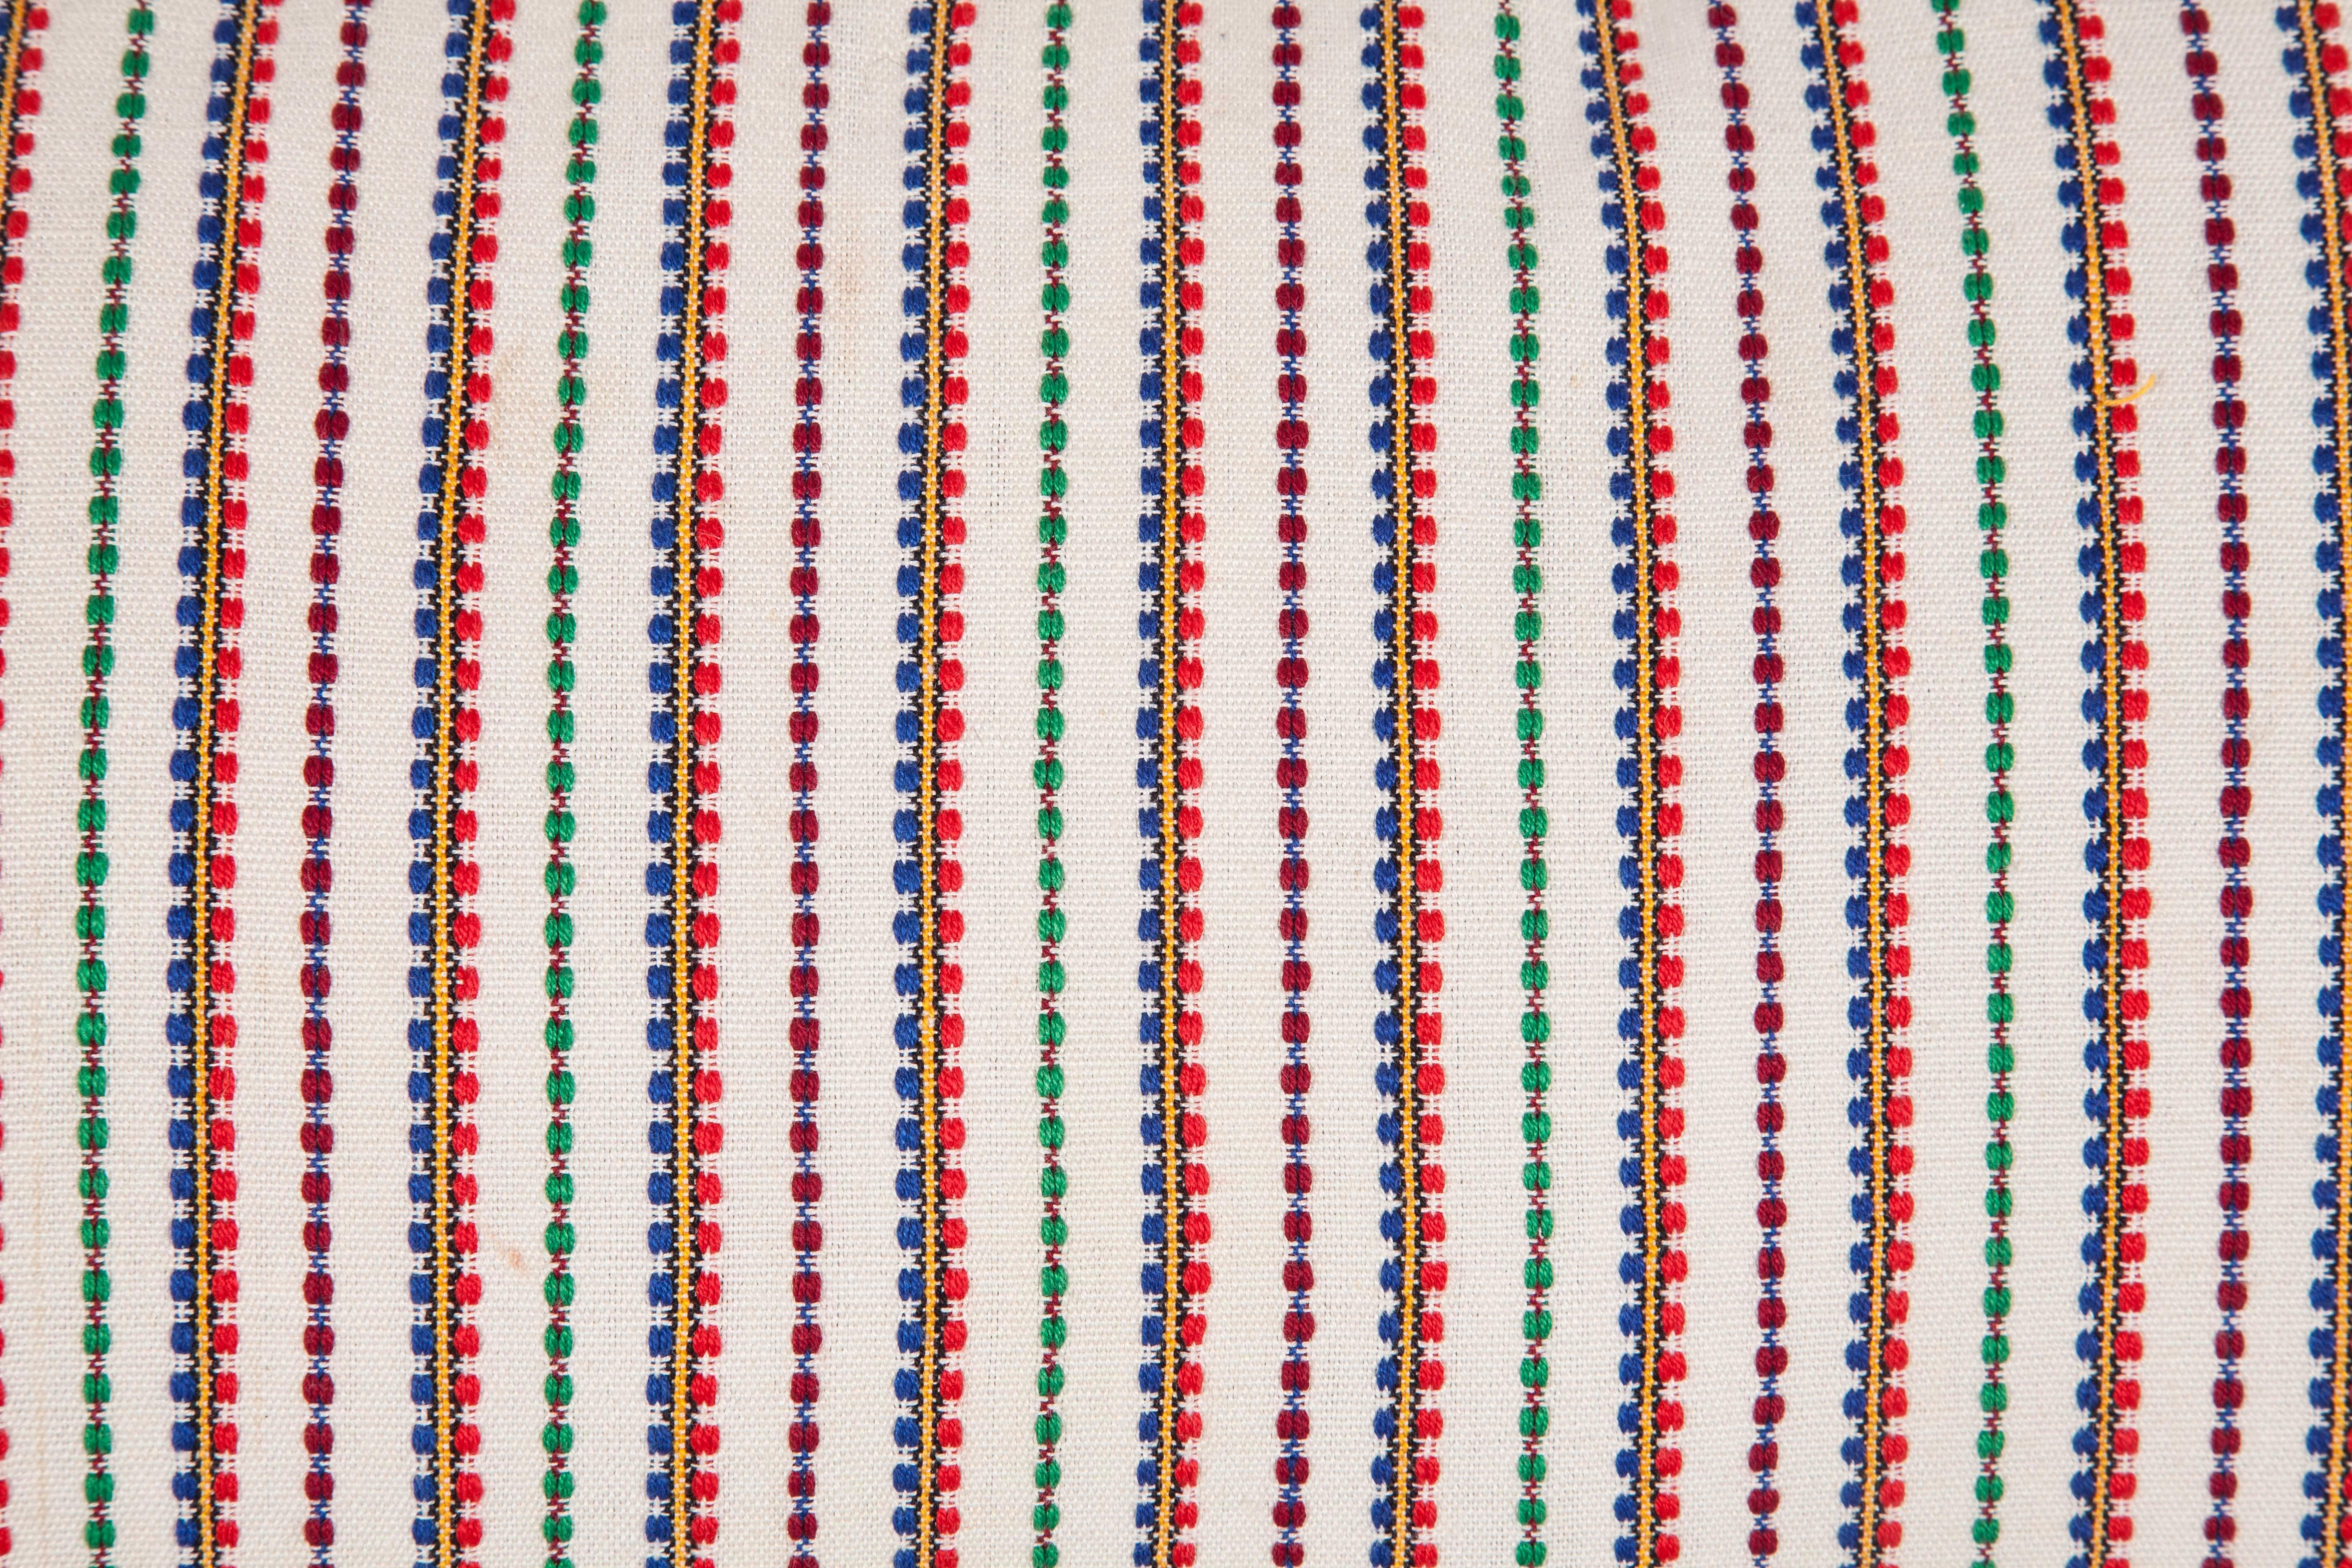 Woven Pillow Made Out of an Early 20th Century Balkan Textile